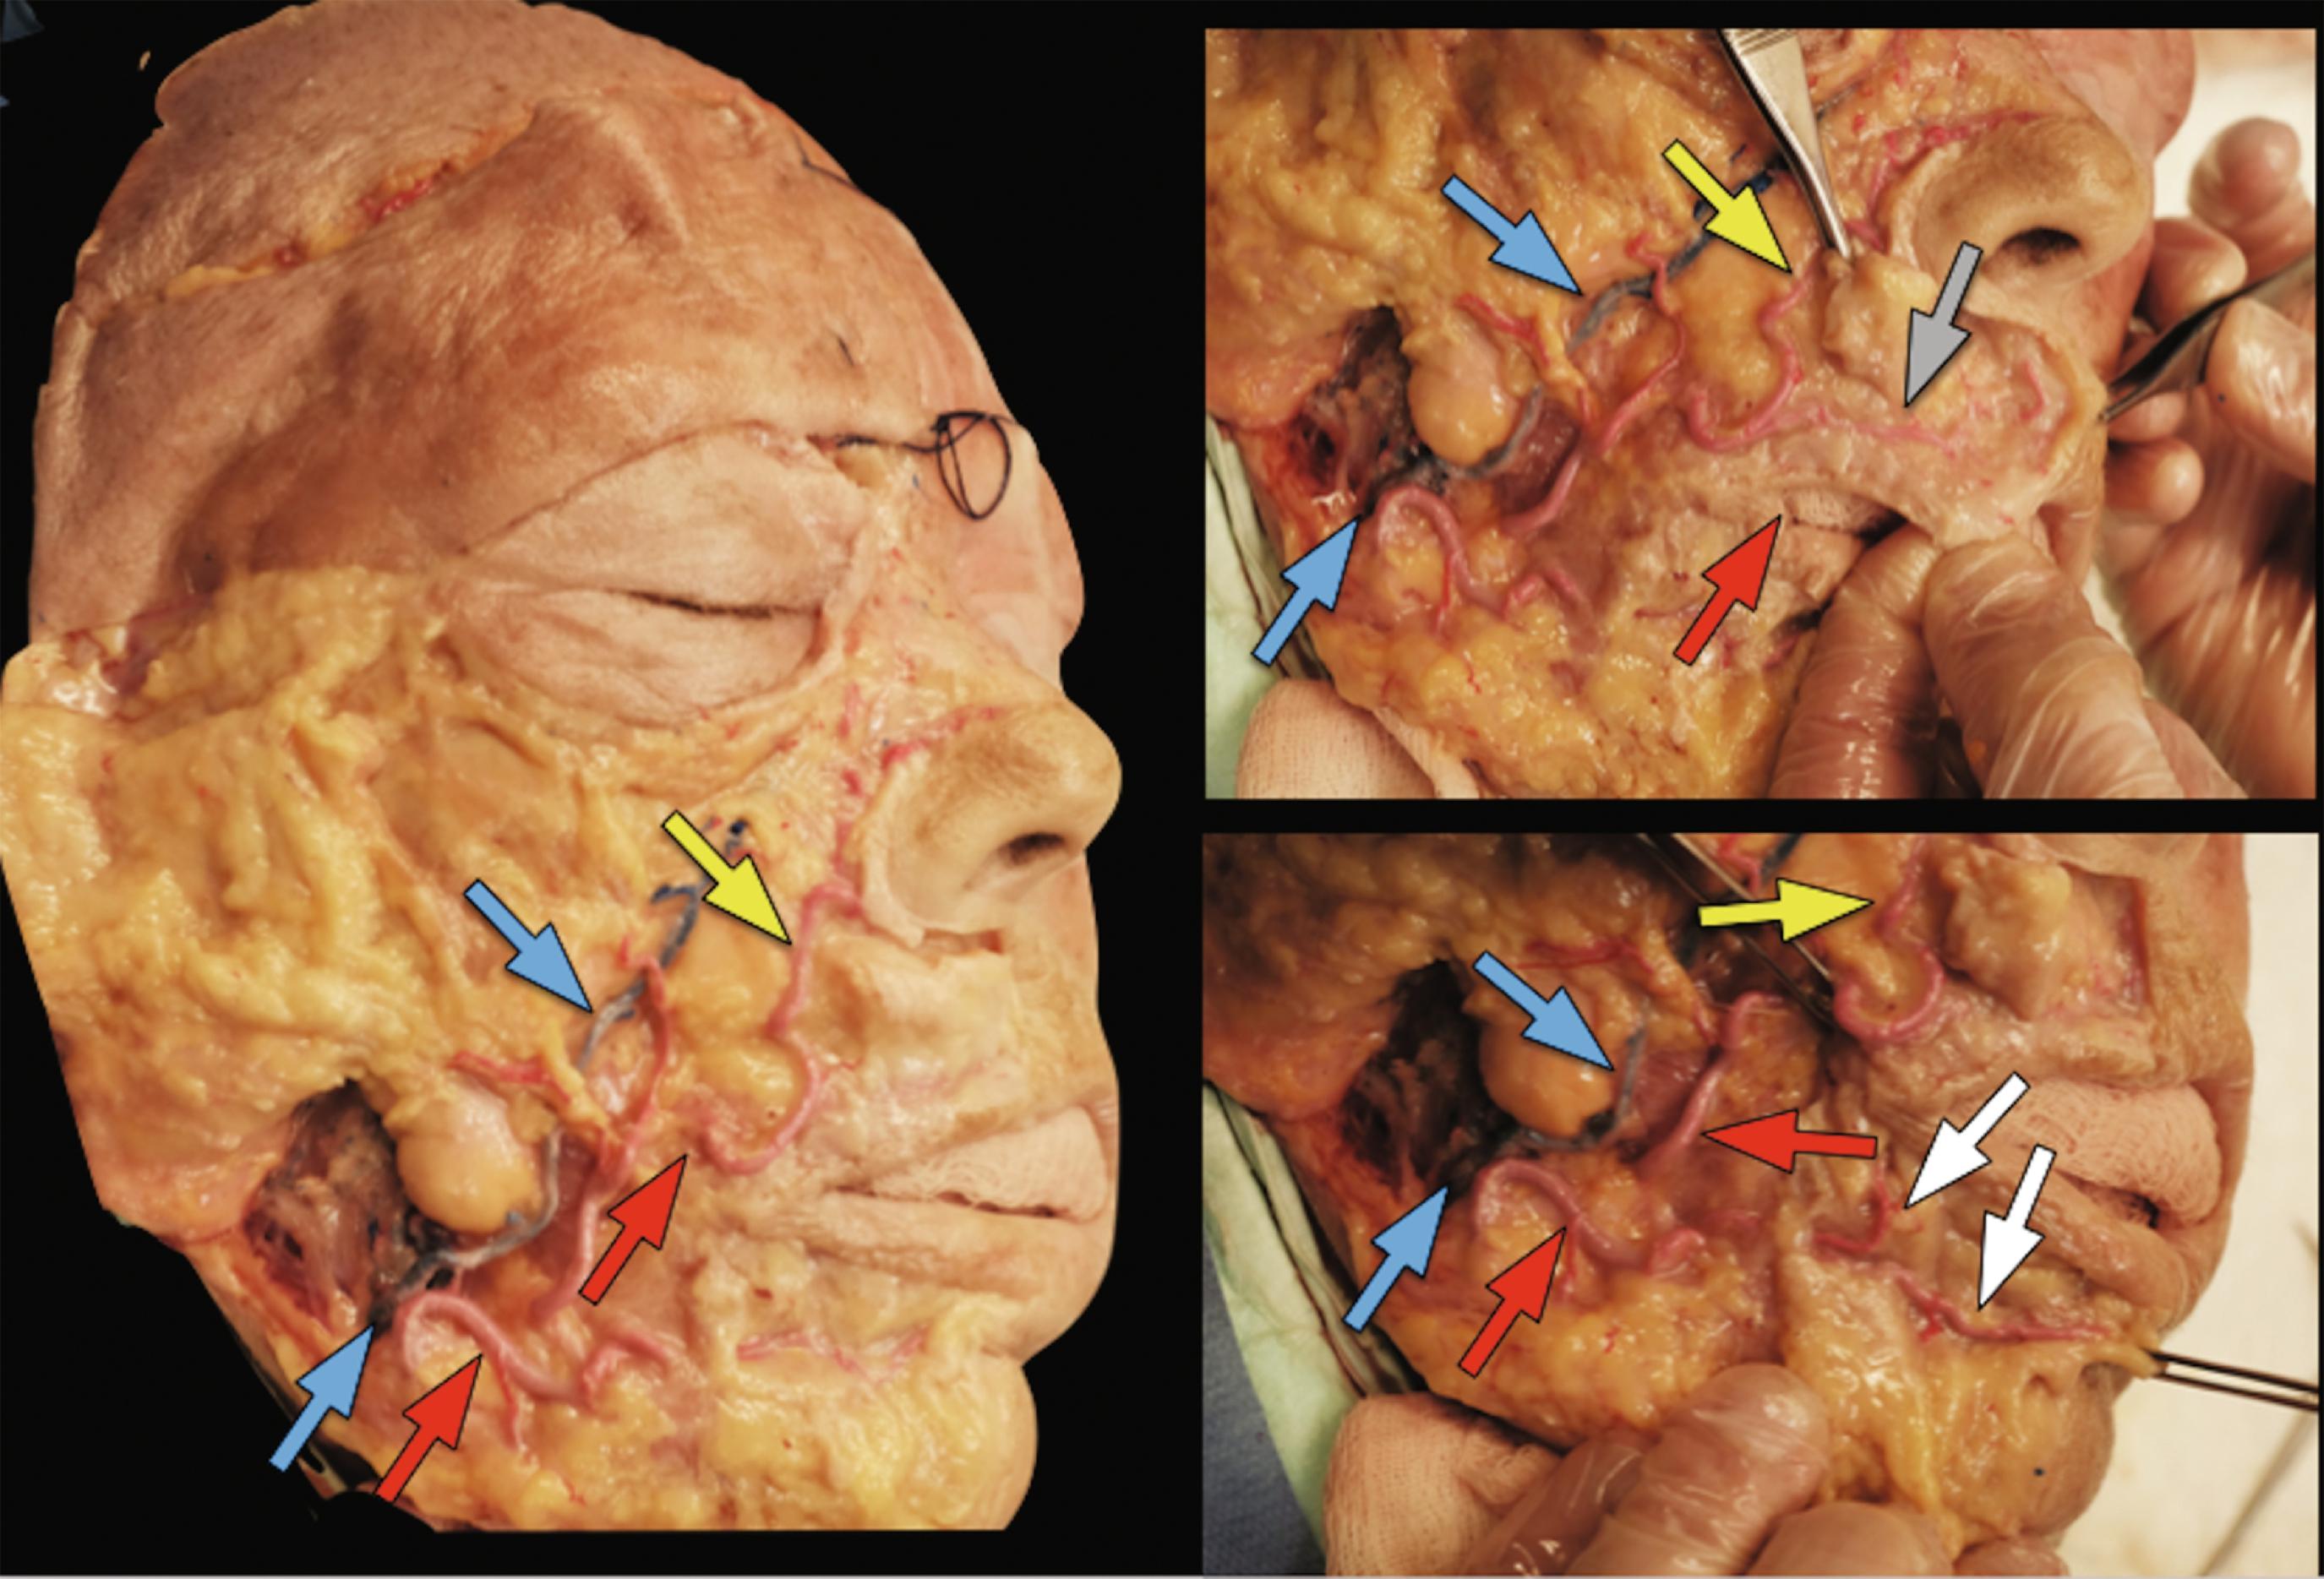 Fig. 21.2, Anatomic specimen illustrating the main vessels of the midface: facial artery (red arrows) , facial vein (blue arrows) , angular artery (yellow arrows) , superior labial artery (gray arrow) , and inferior labial artery (white arrows).